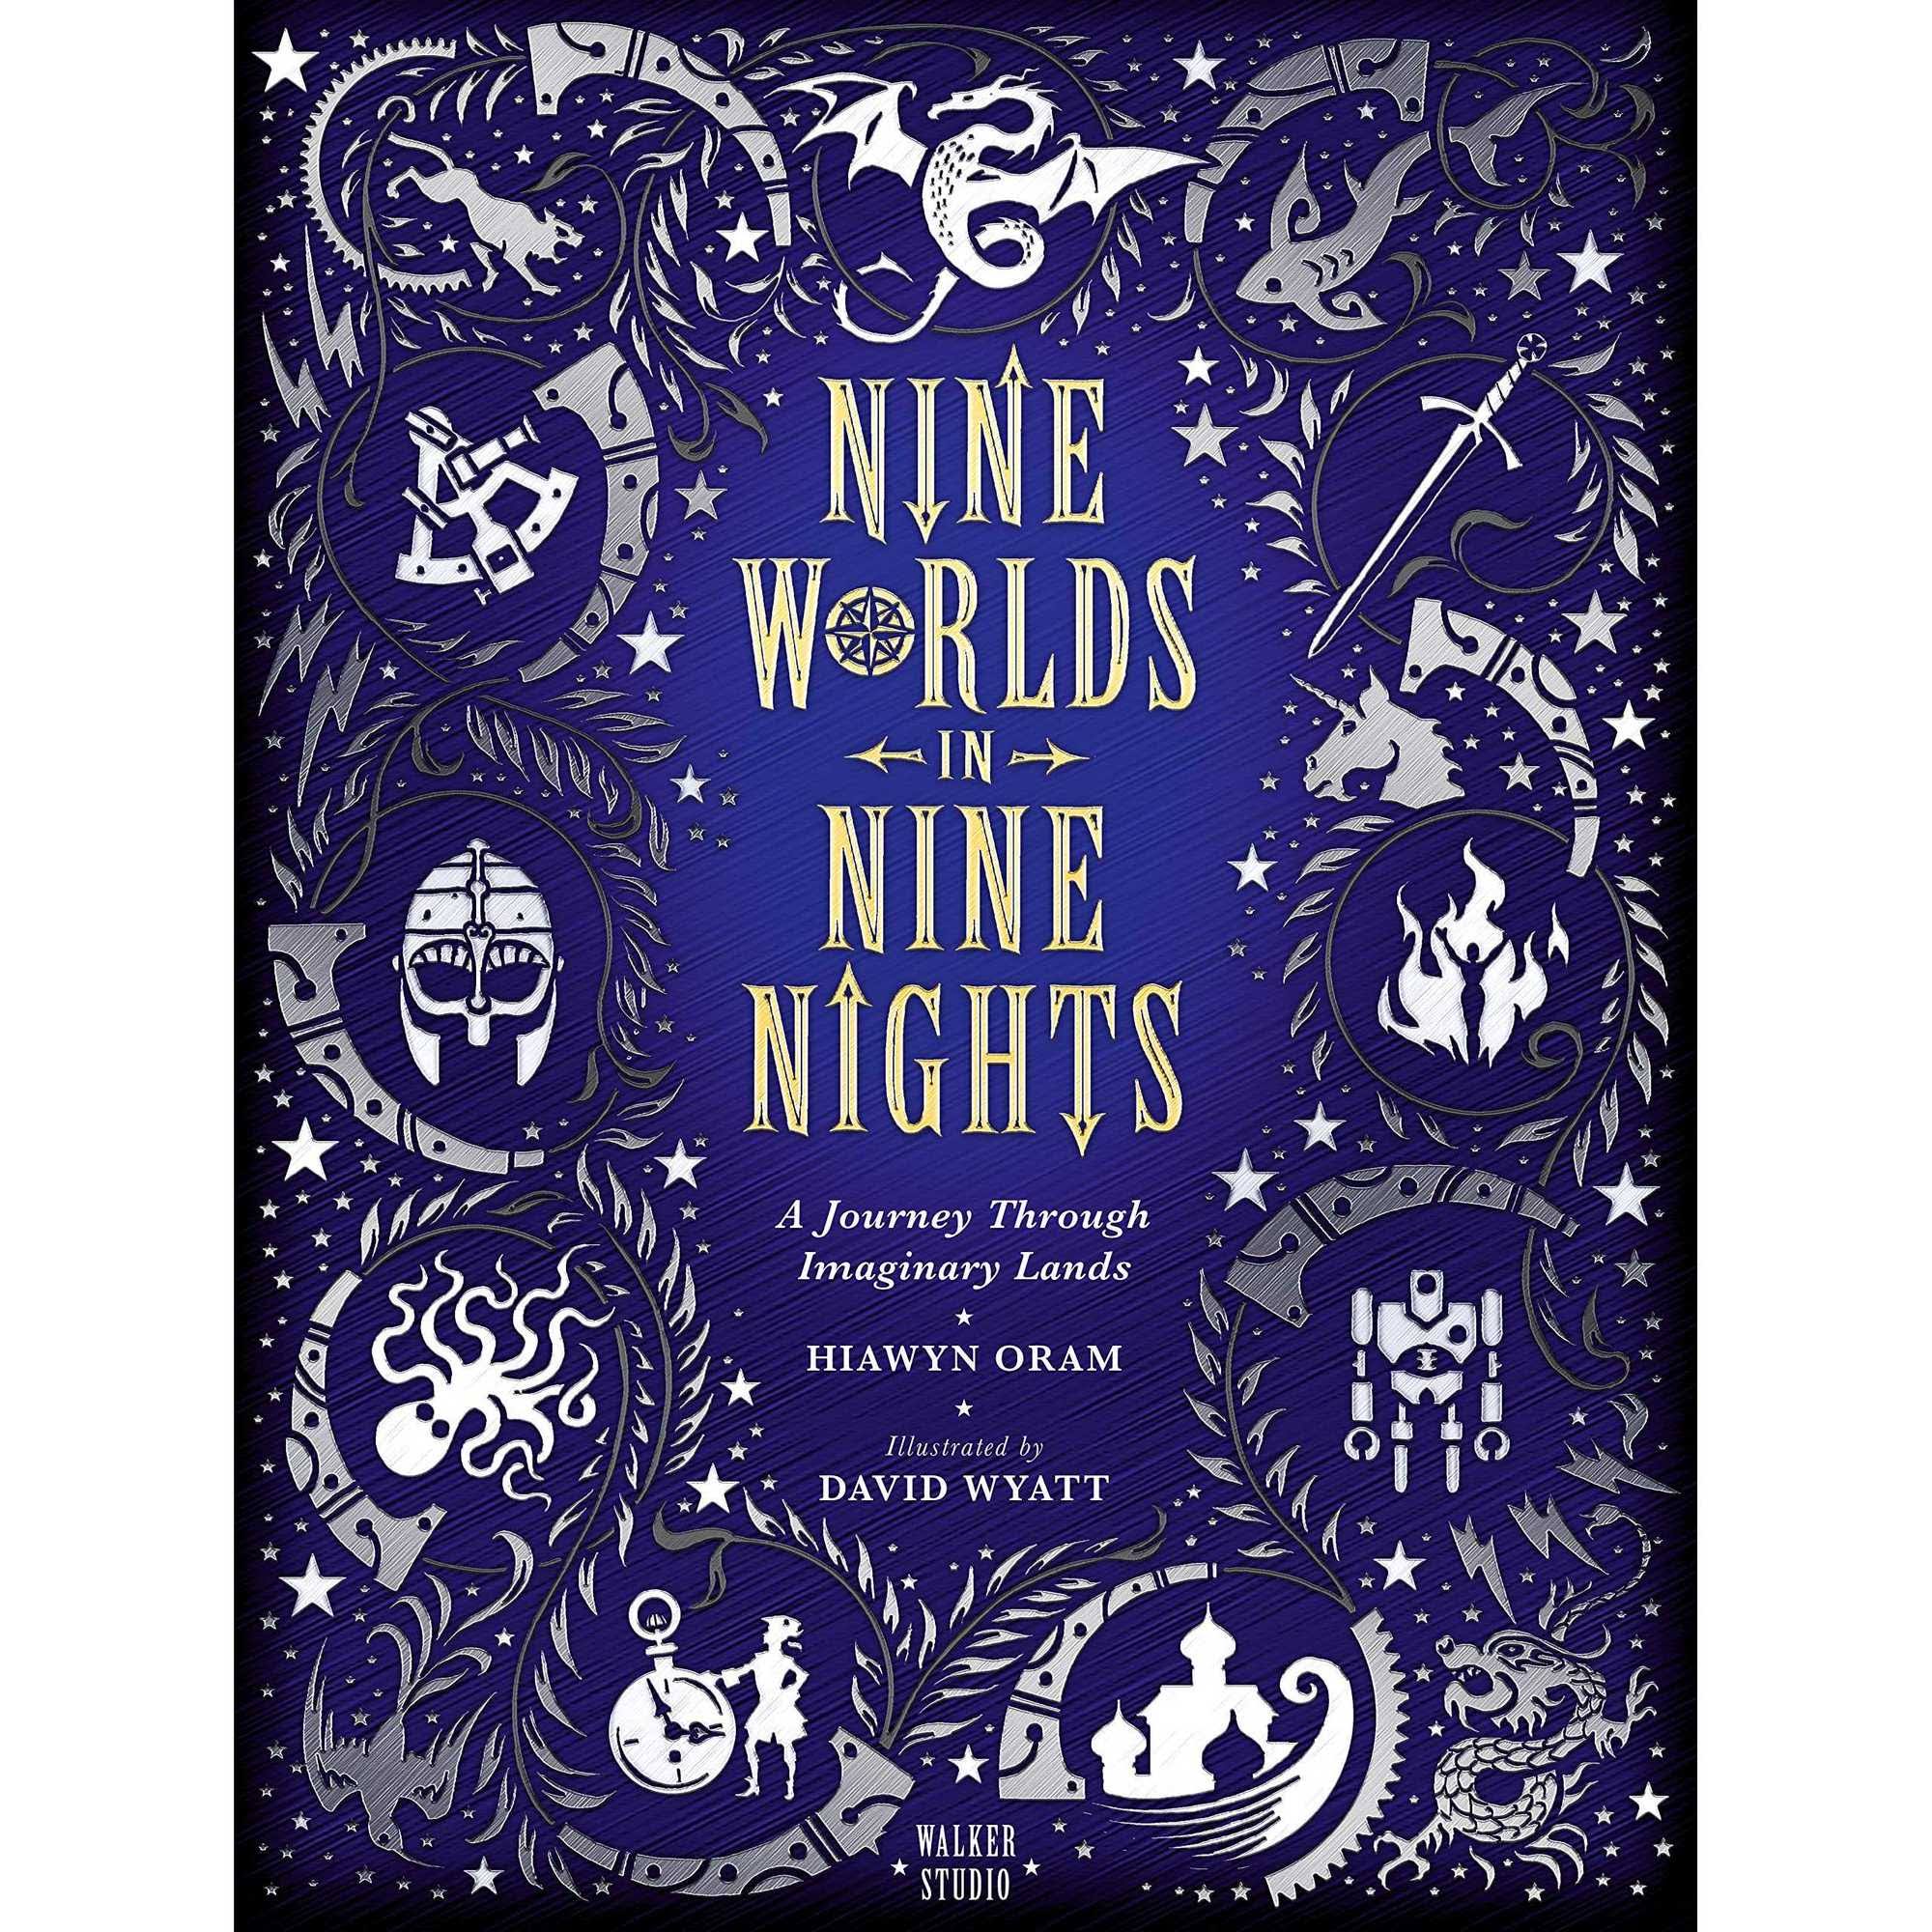 Nine Worlds in Nine Nights: A Journey Through Imaginary Lands [Book]